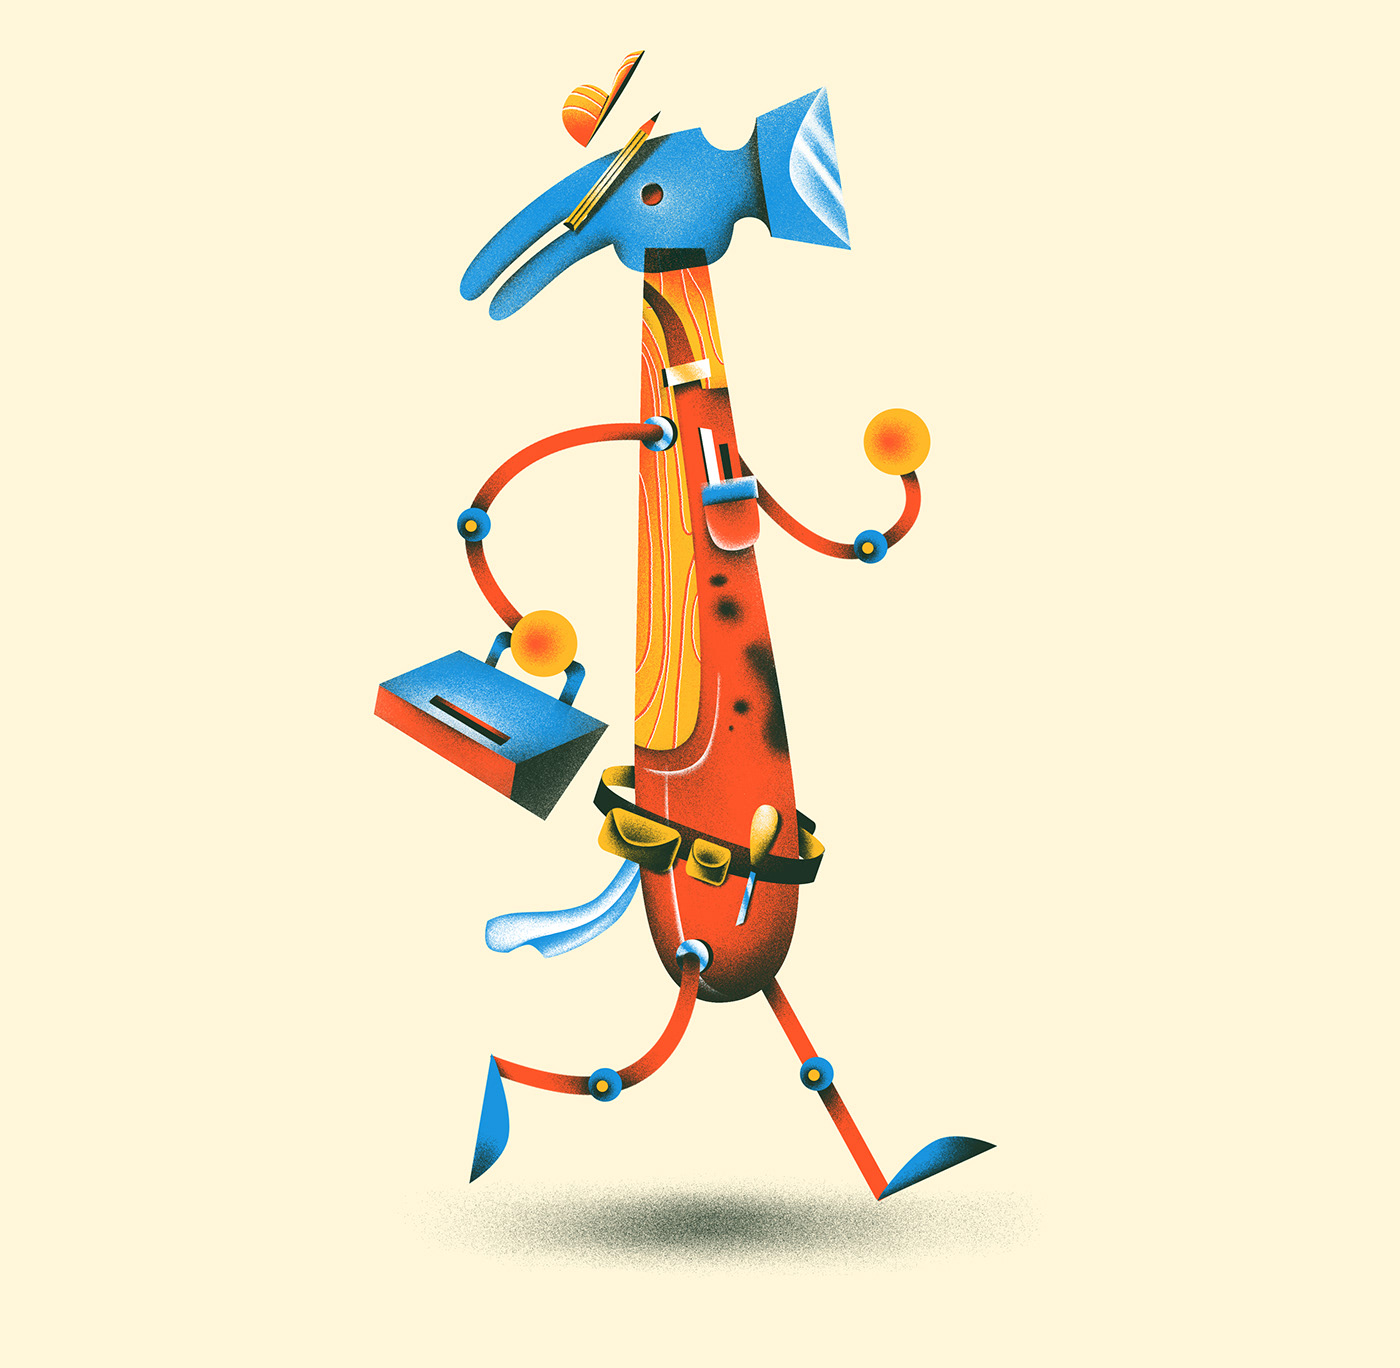 ILLUSTRATION  animation  Playground Character design Cartoons tools Playful frame by frame Patterns